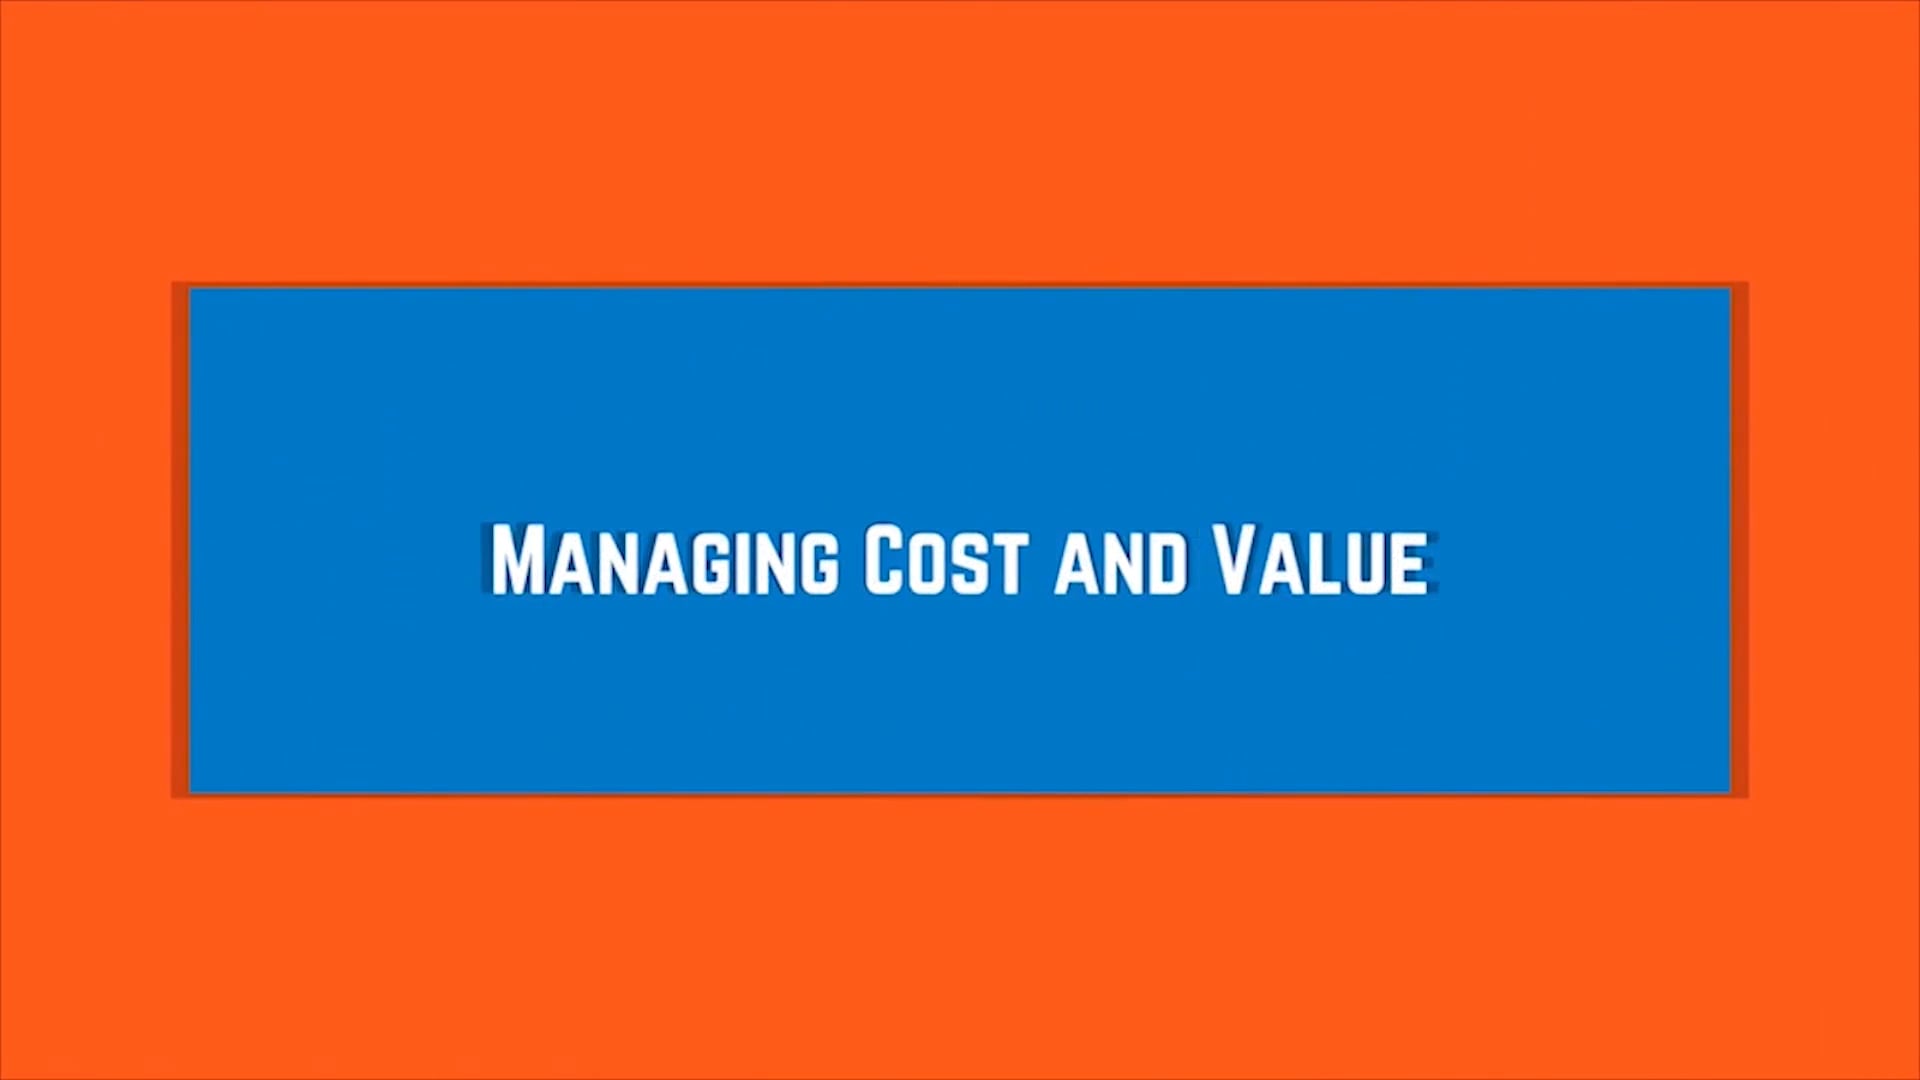 Managing Cost and Value